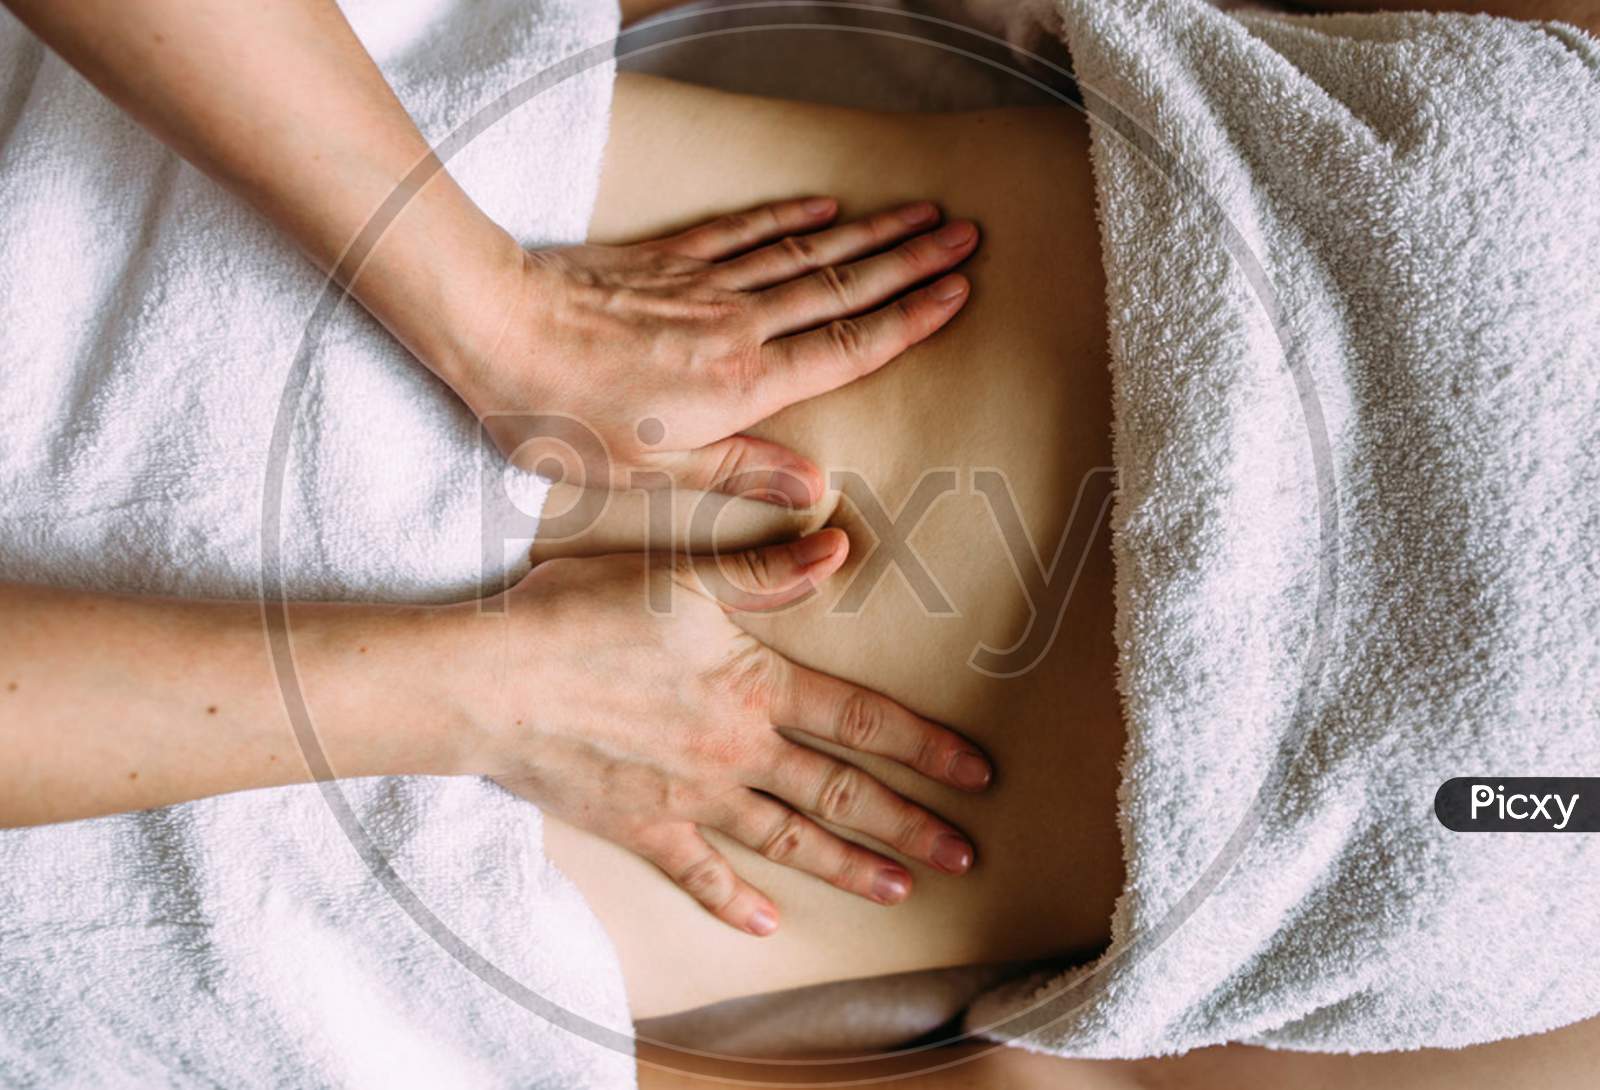 The Masseur Gives A Massage To The Female Belly At The Spa.